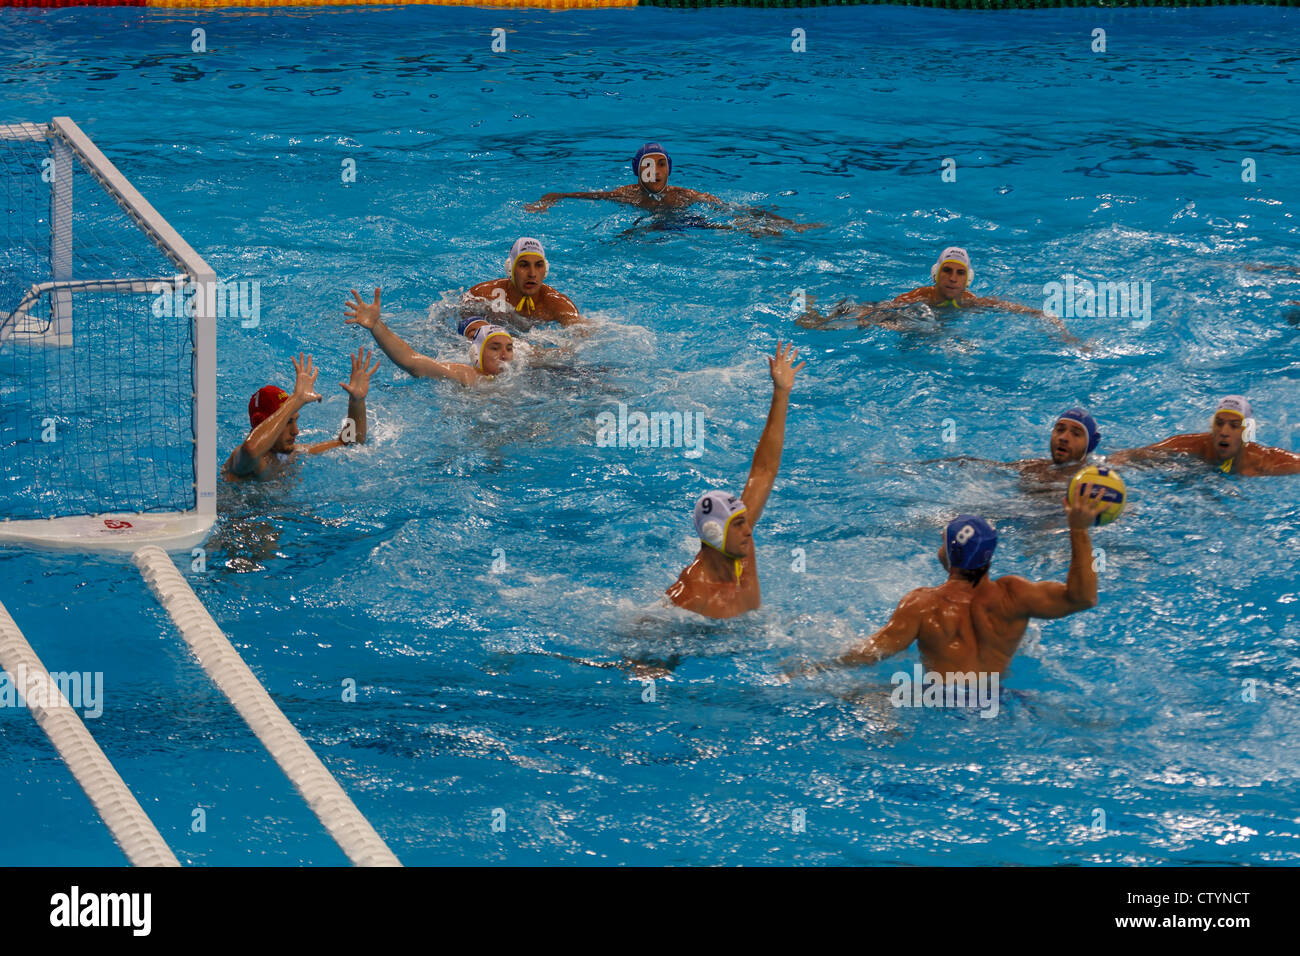 Olympic Summer Games water polo match inside water cube stadium on August 22, 2008 in Beijing, China Stock Photo